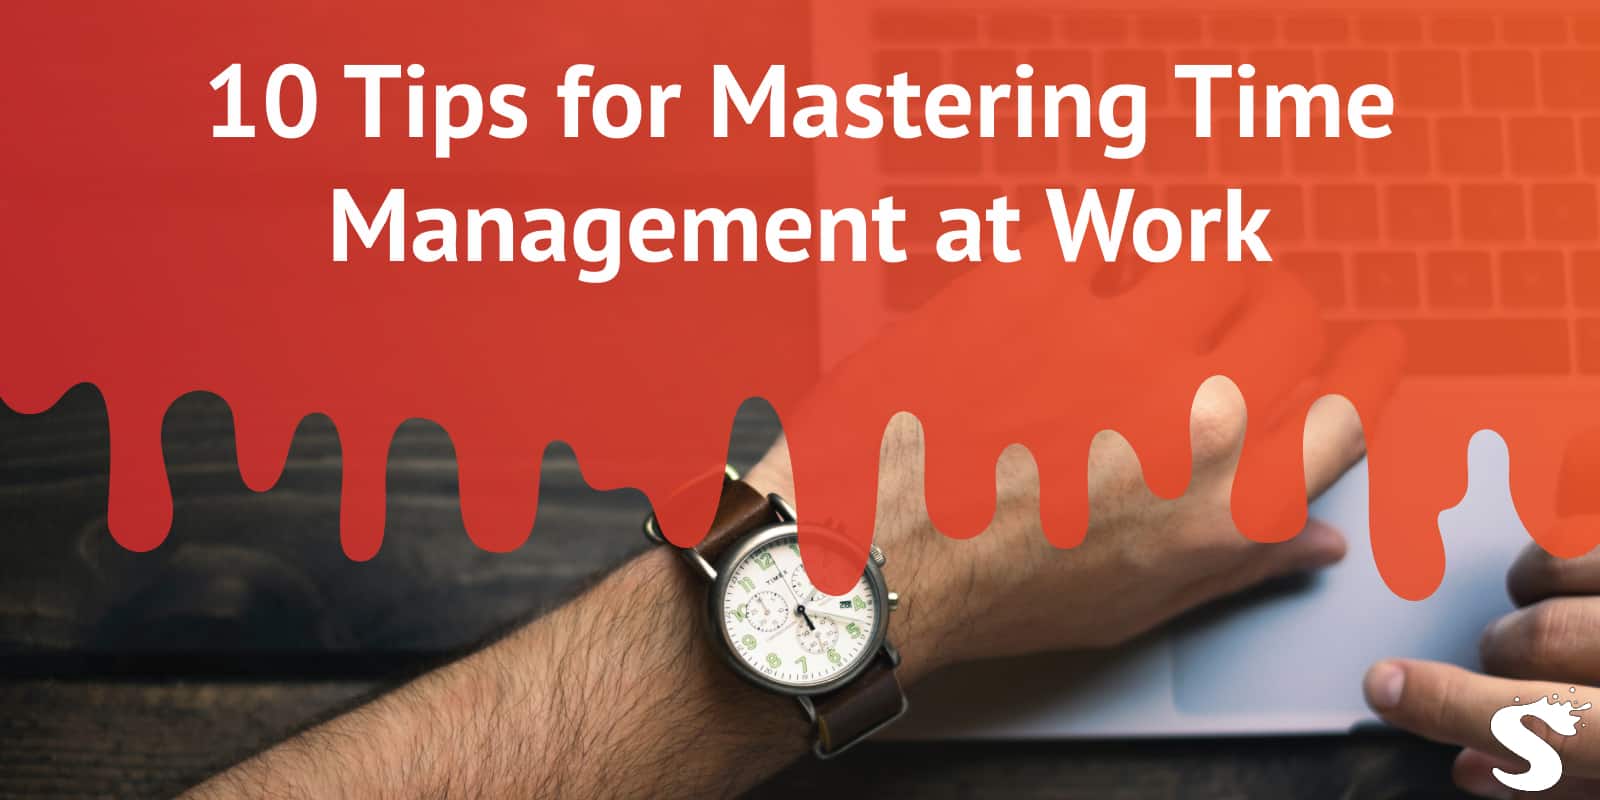 10 Tips for Mastering Time Management at Work